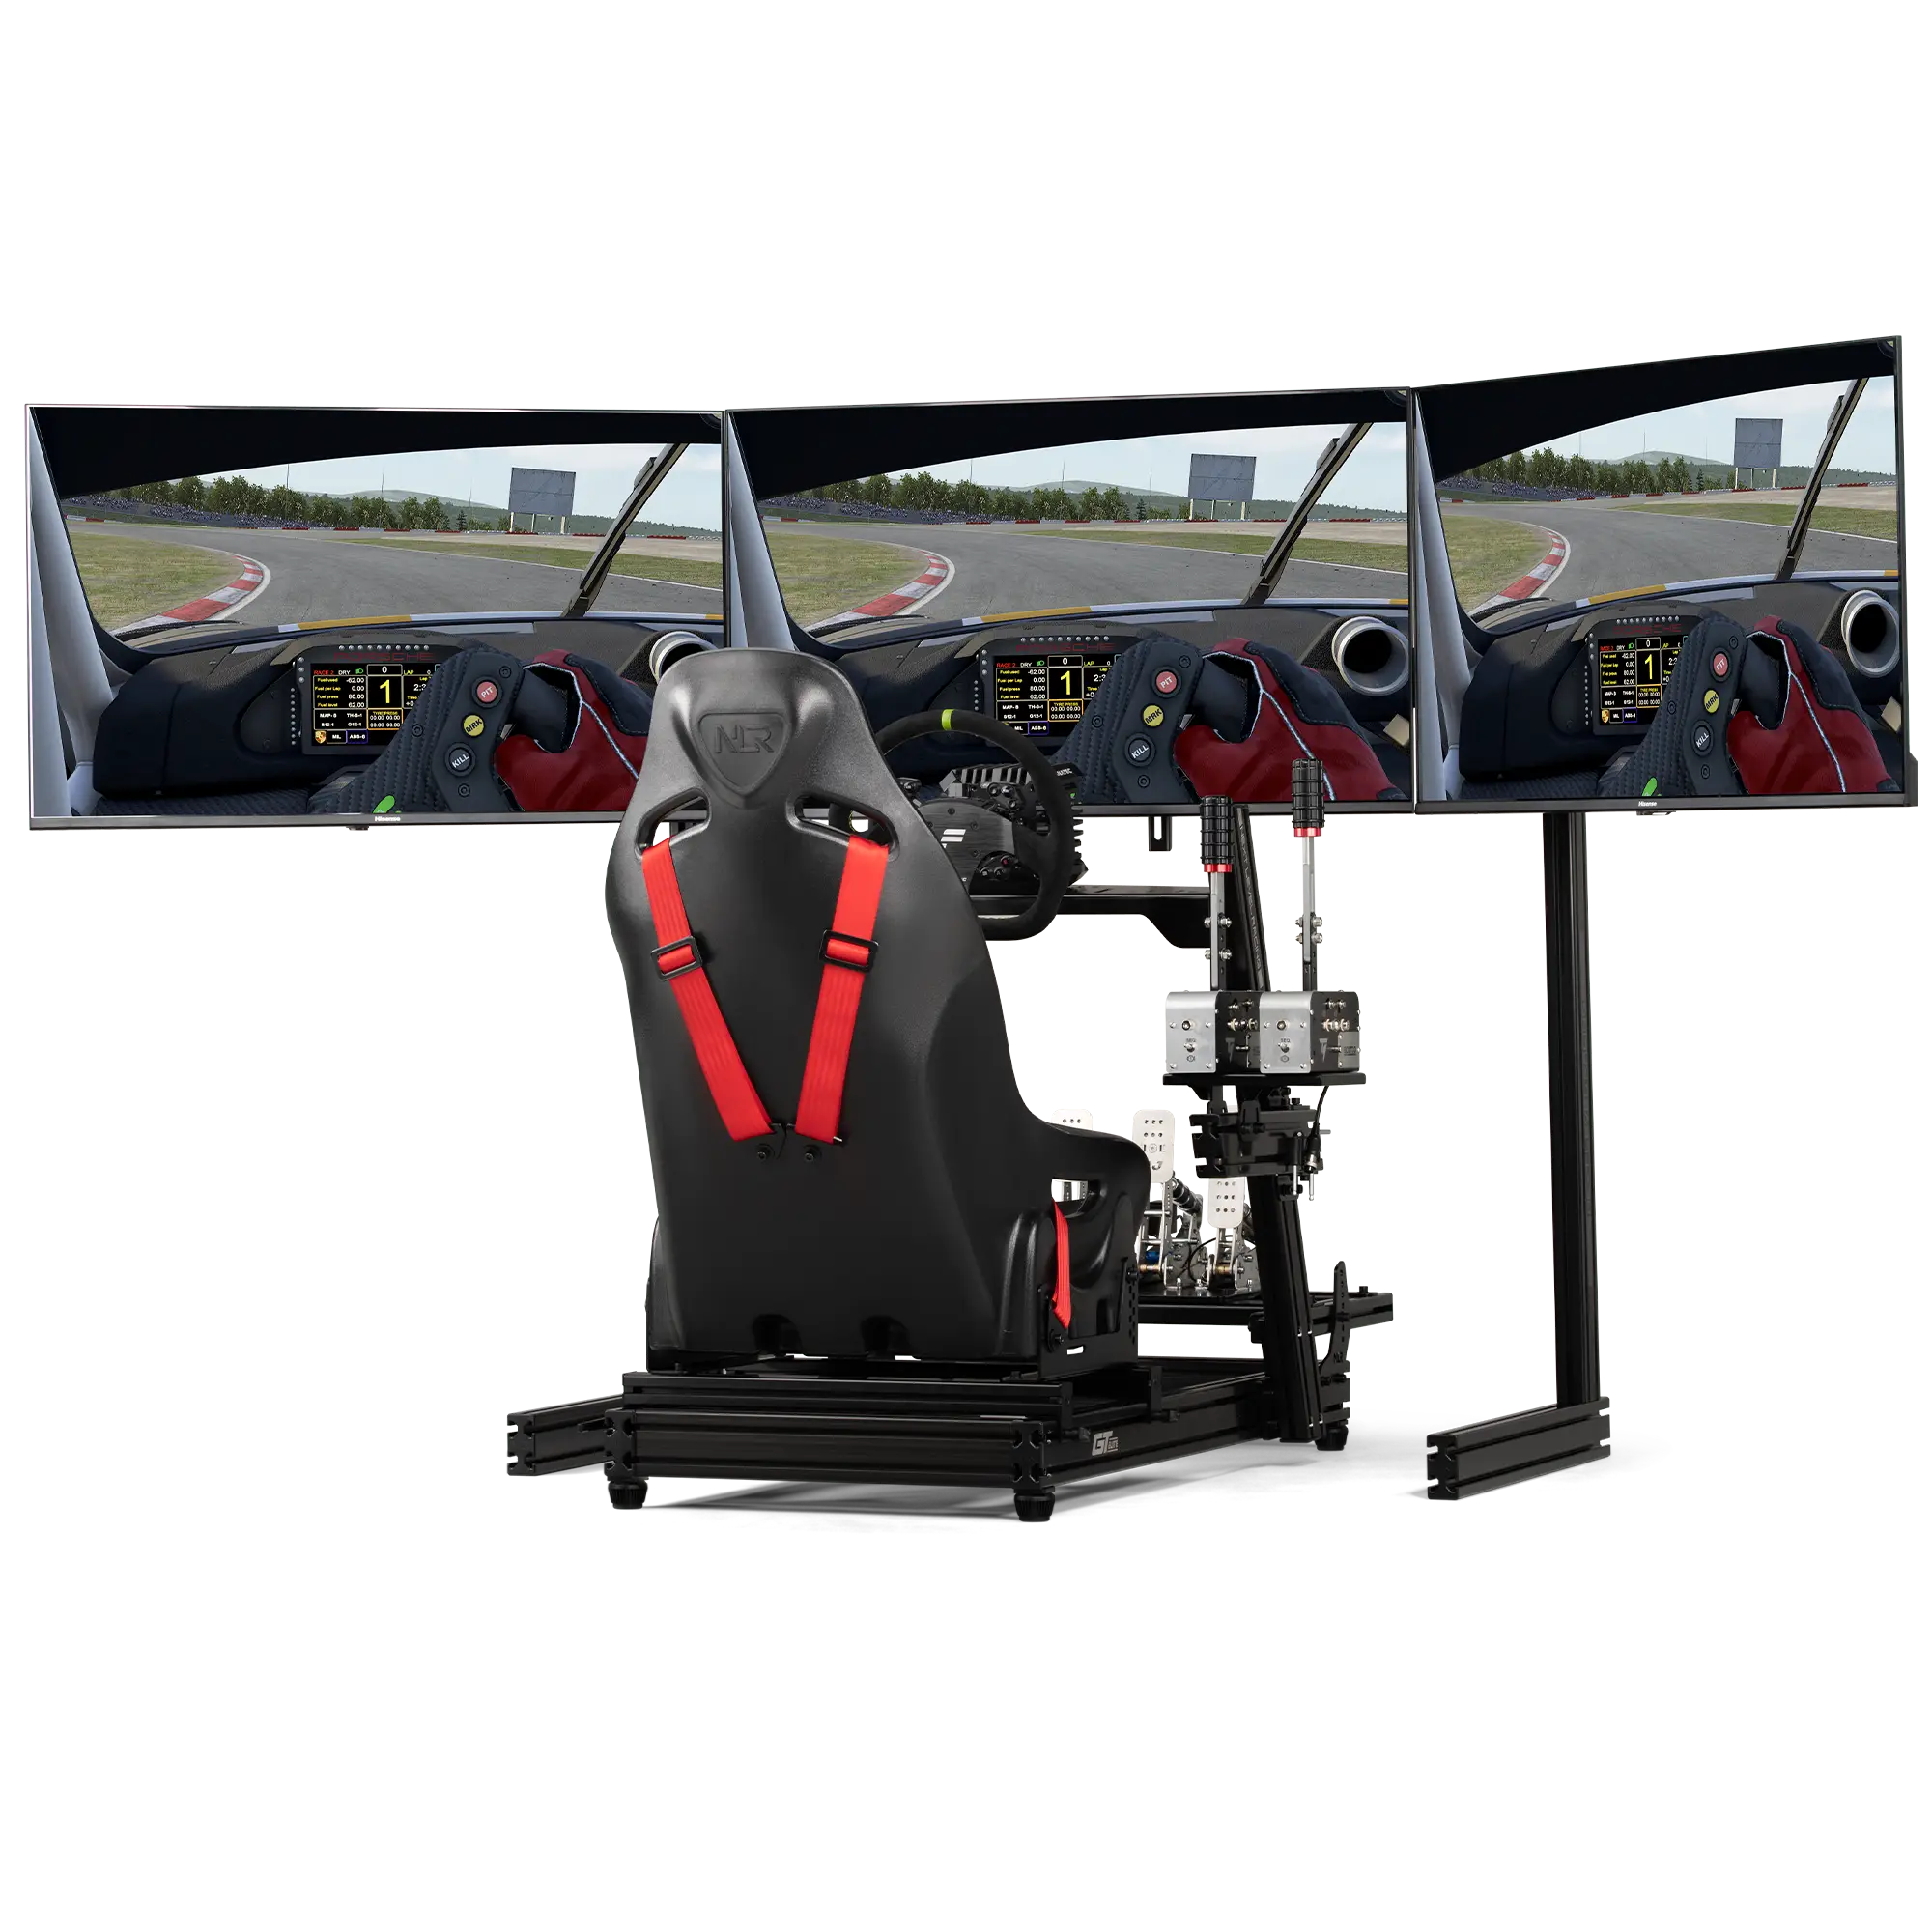 Next Level Racing Free Standing Triple Monitor Stand